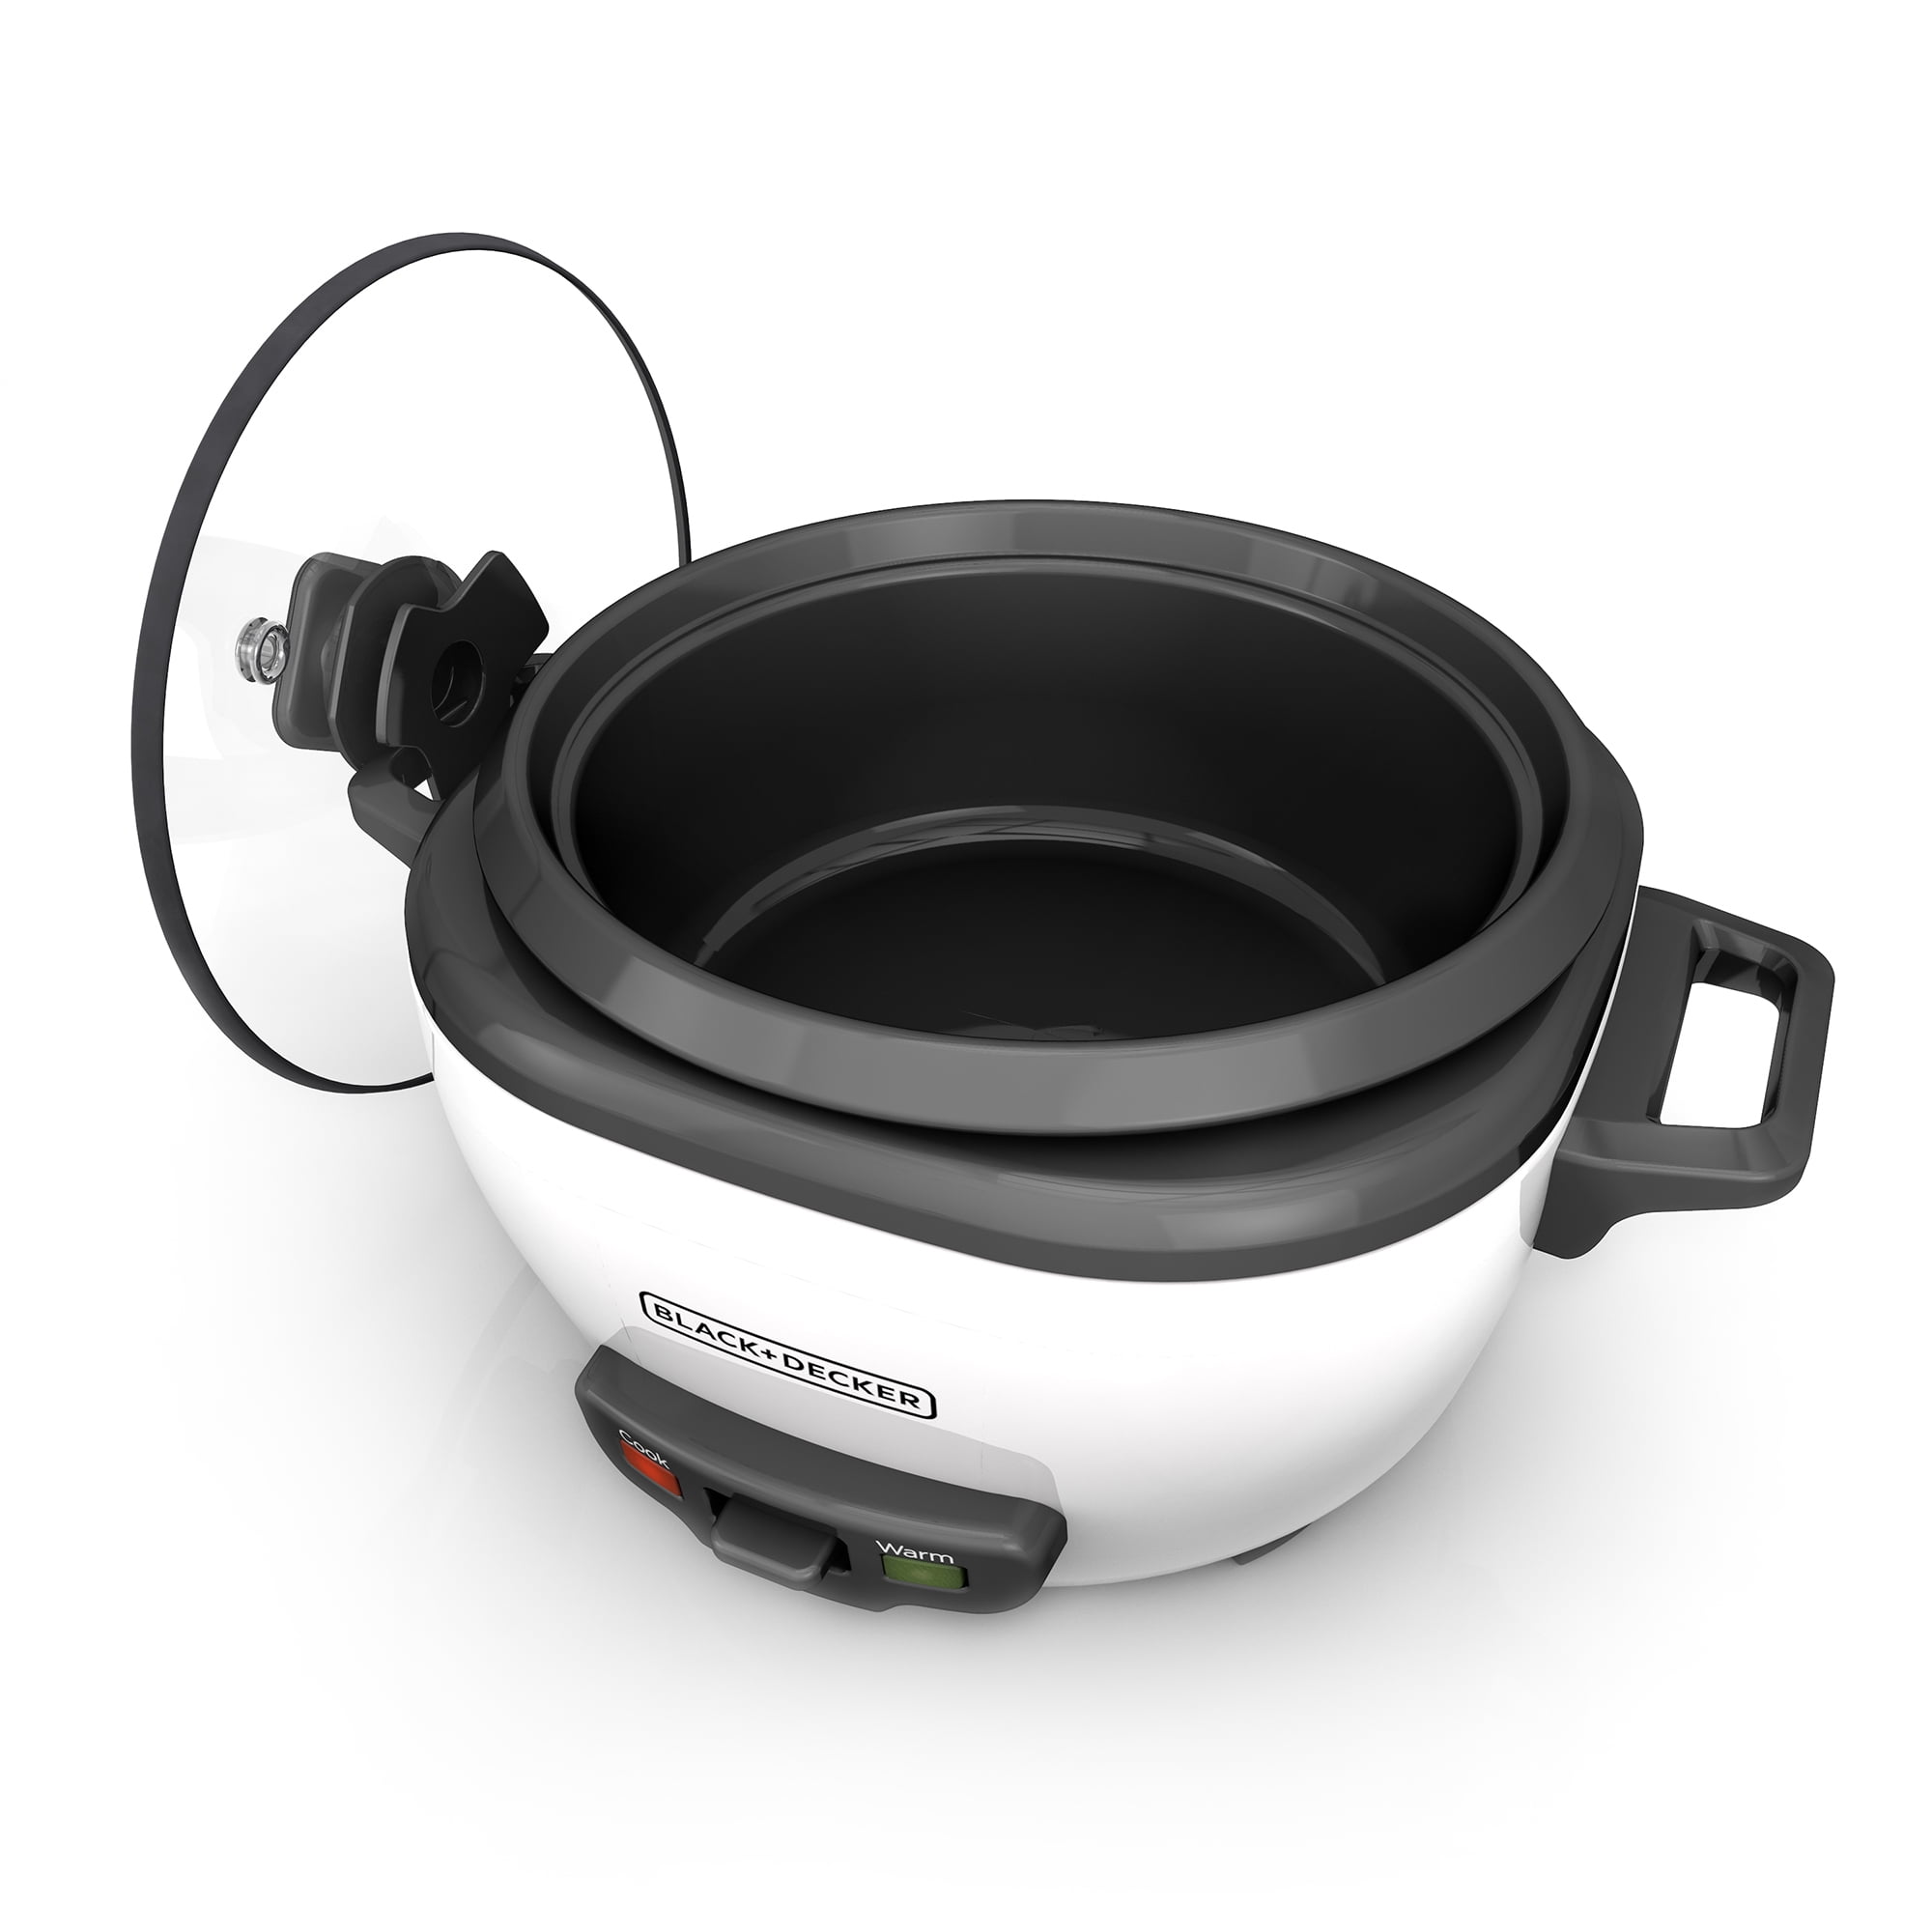 Black And Decker 6 Cup Rice Cooker In White. Model RC3406.